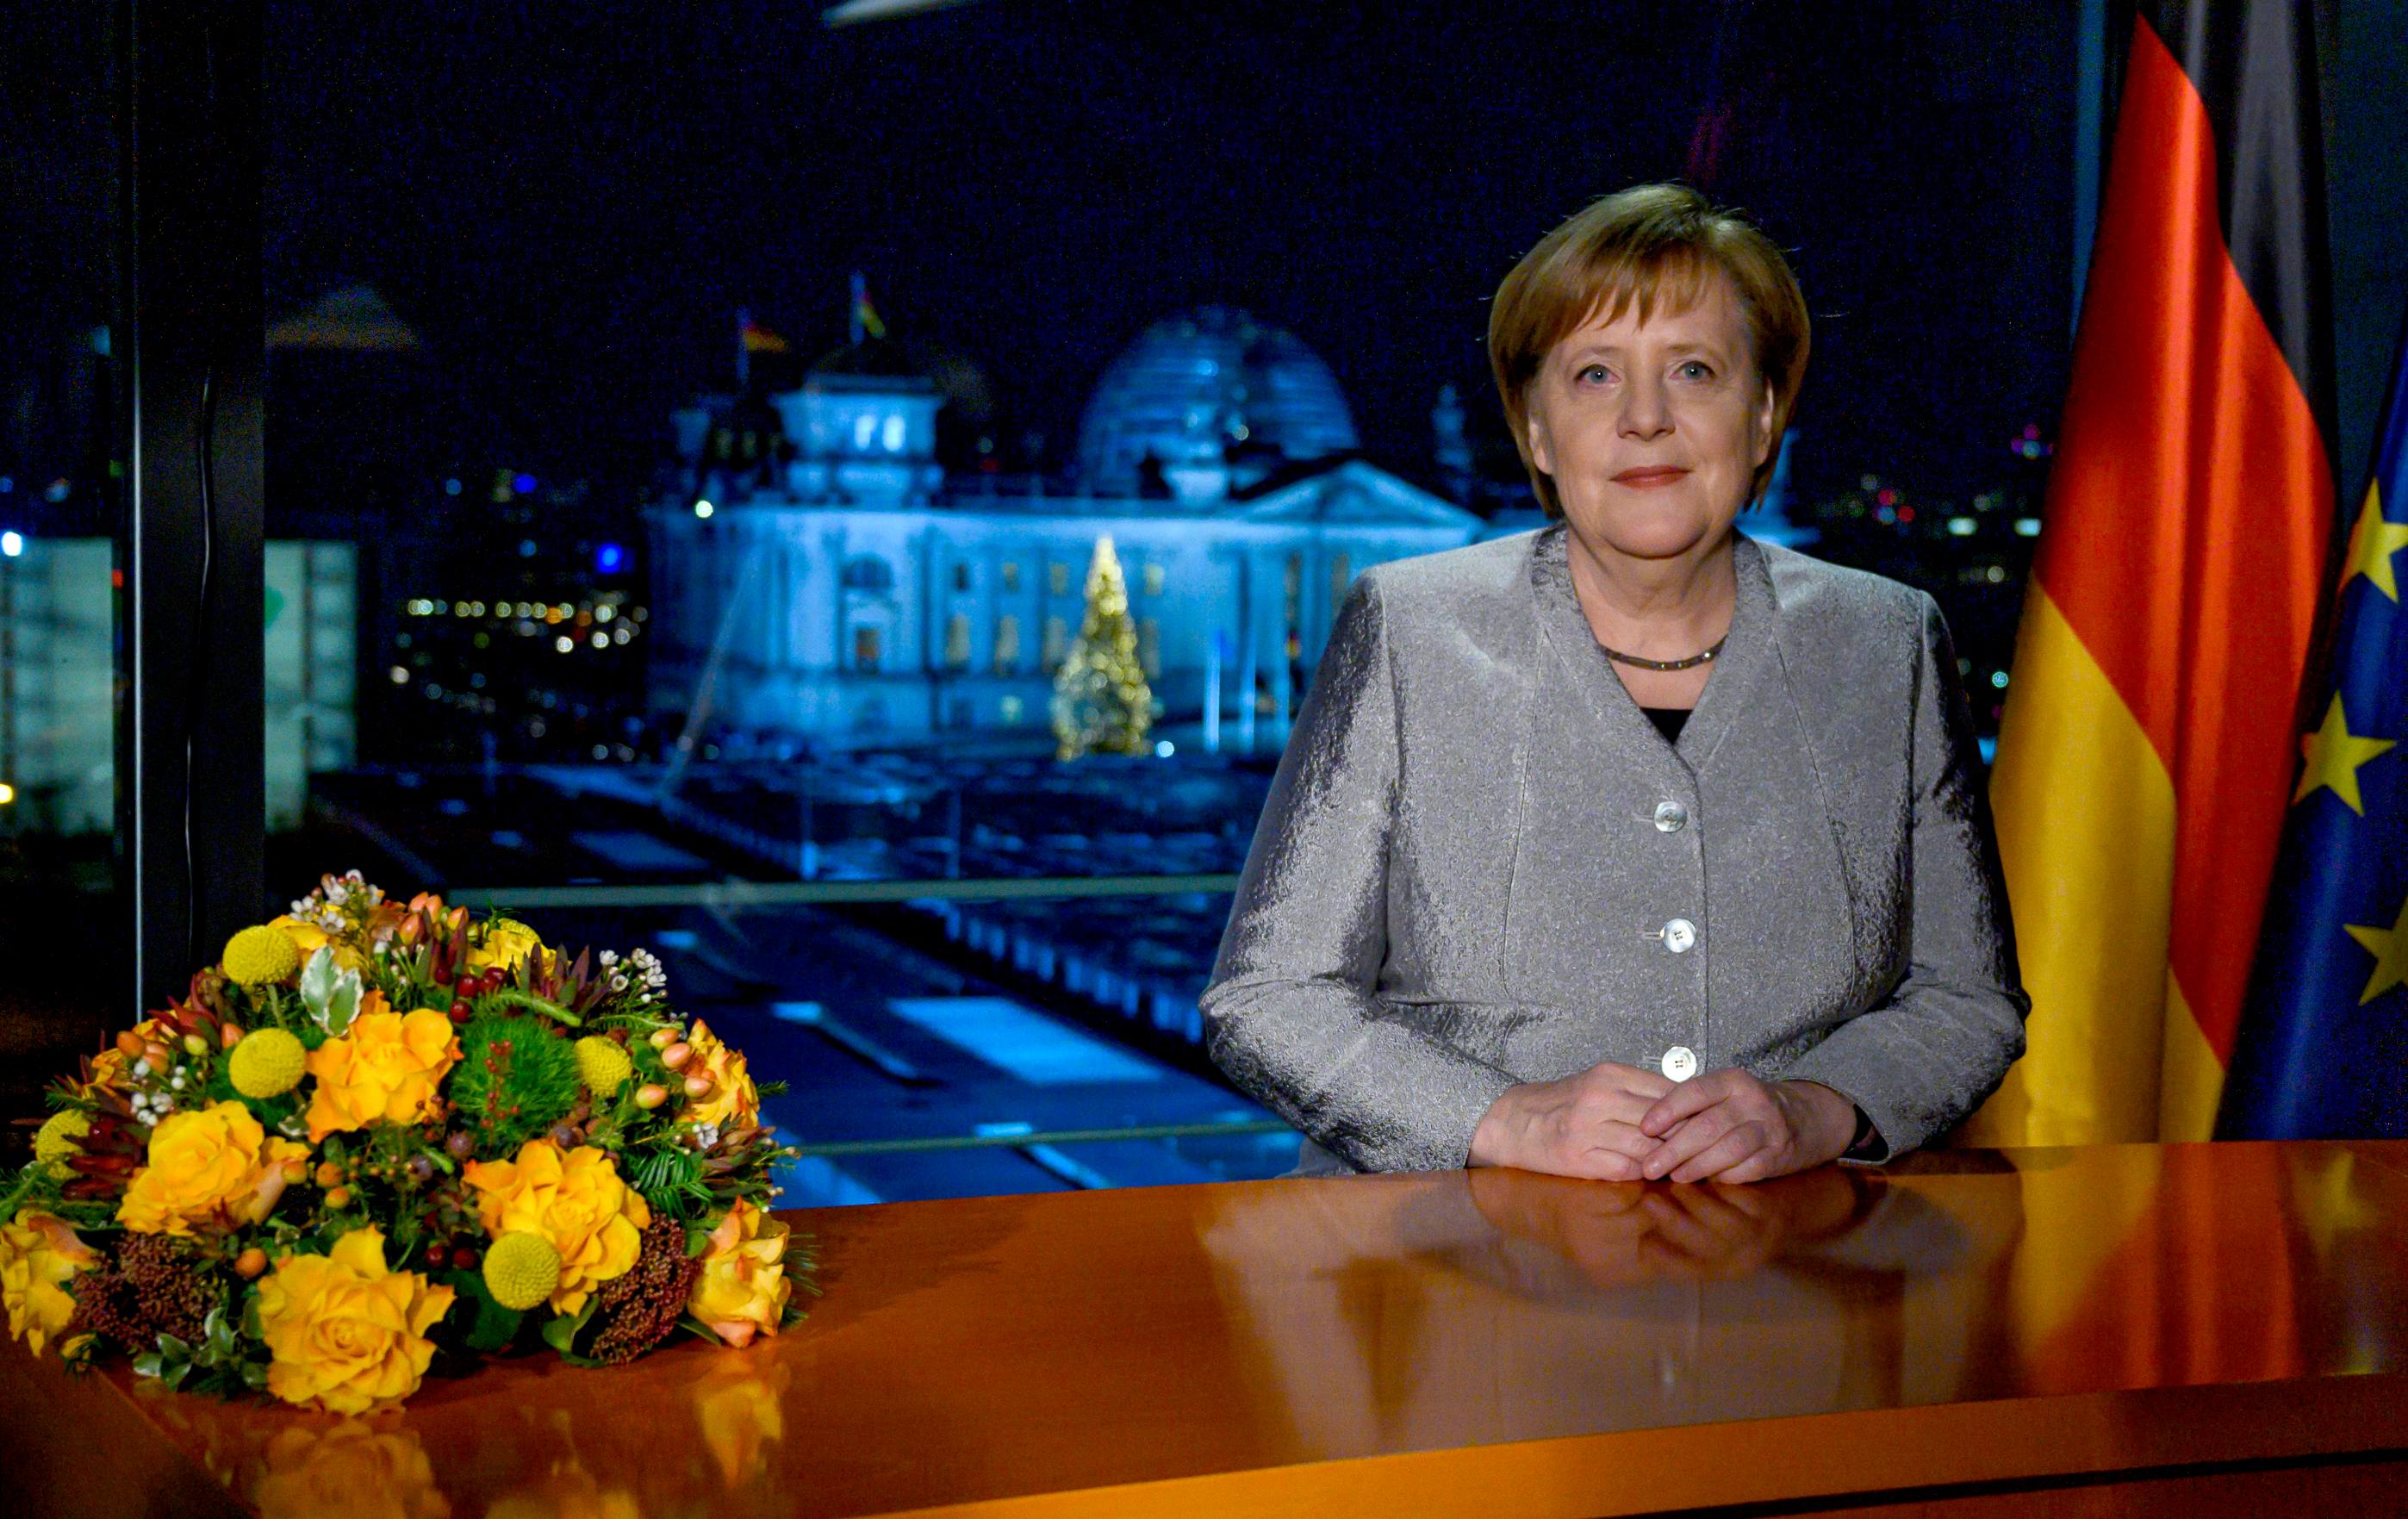 German Chancellor Angela Merkel poses for a photograph after the recording of her annual New Year's speech at the Chancellery in Berlin, Germany, Dec. 30, 2018. [Photo: John MacDougall/ via AP]